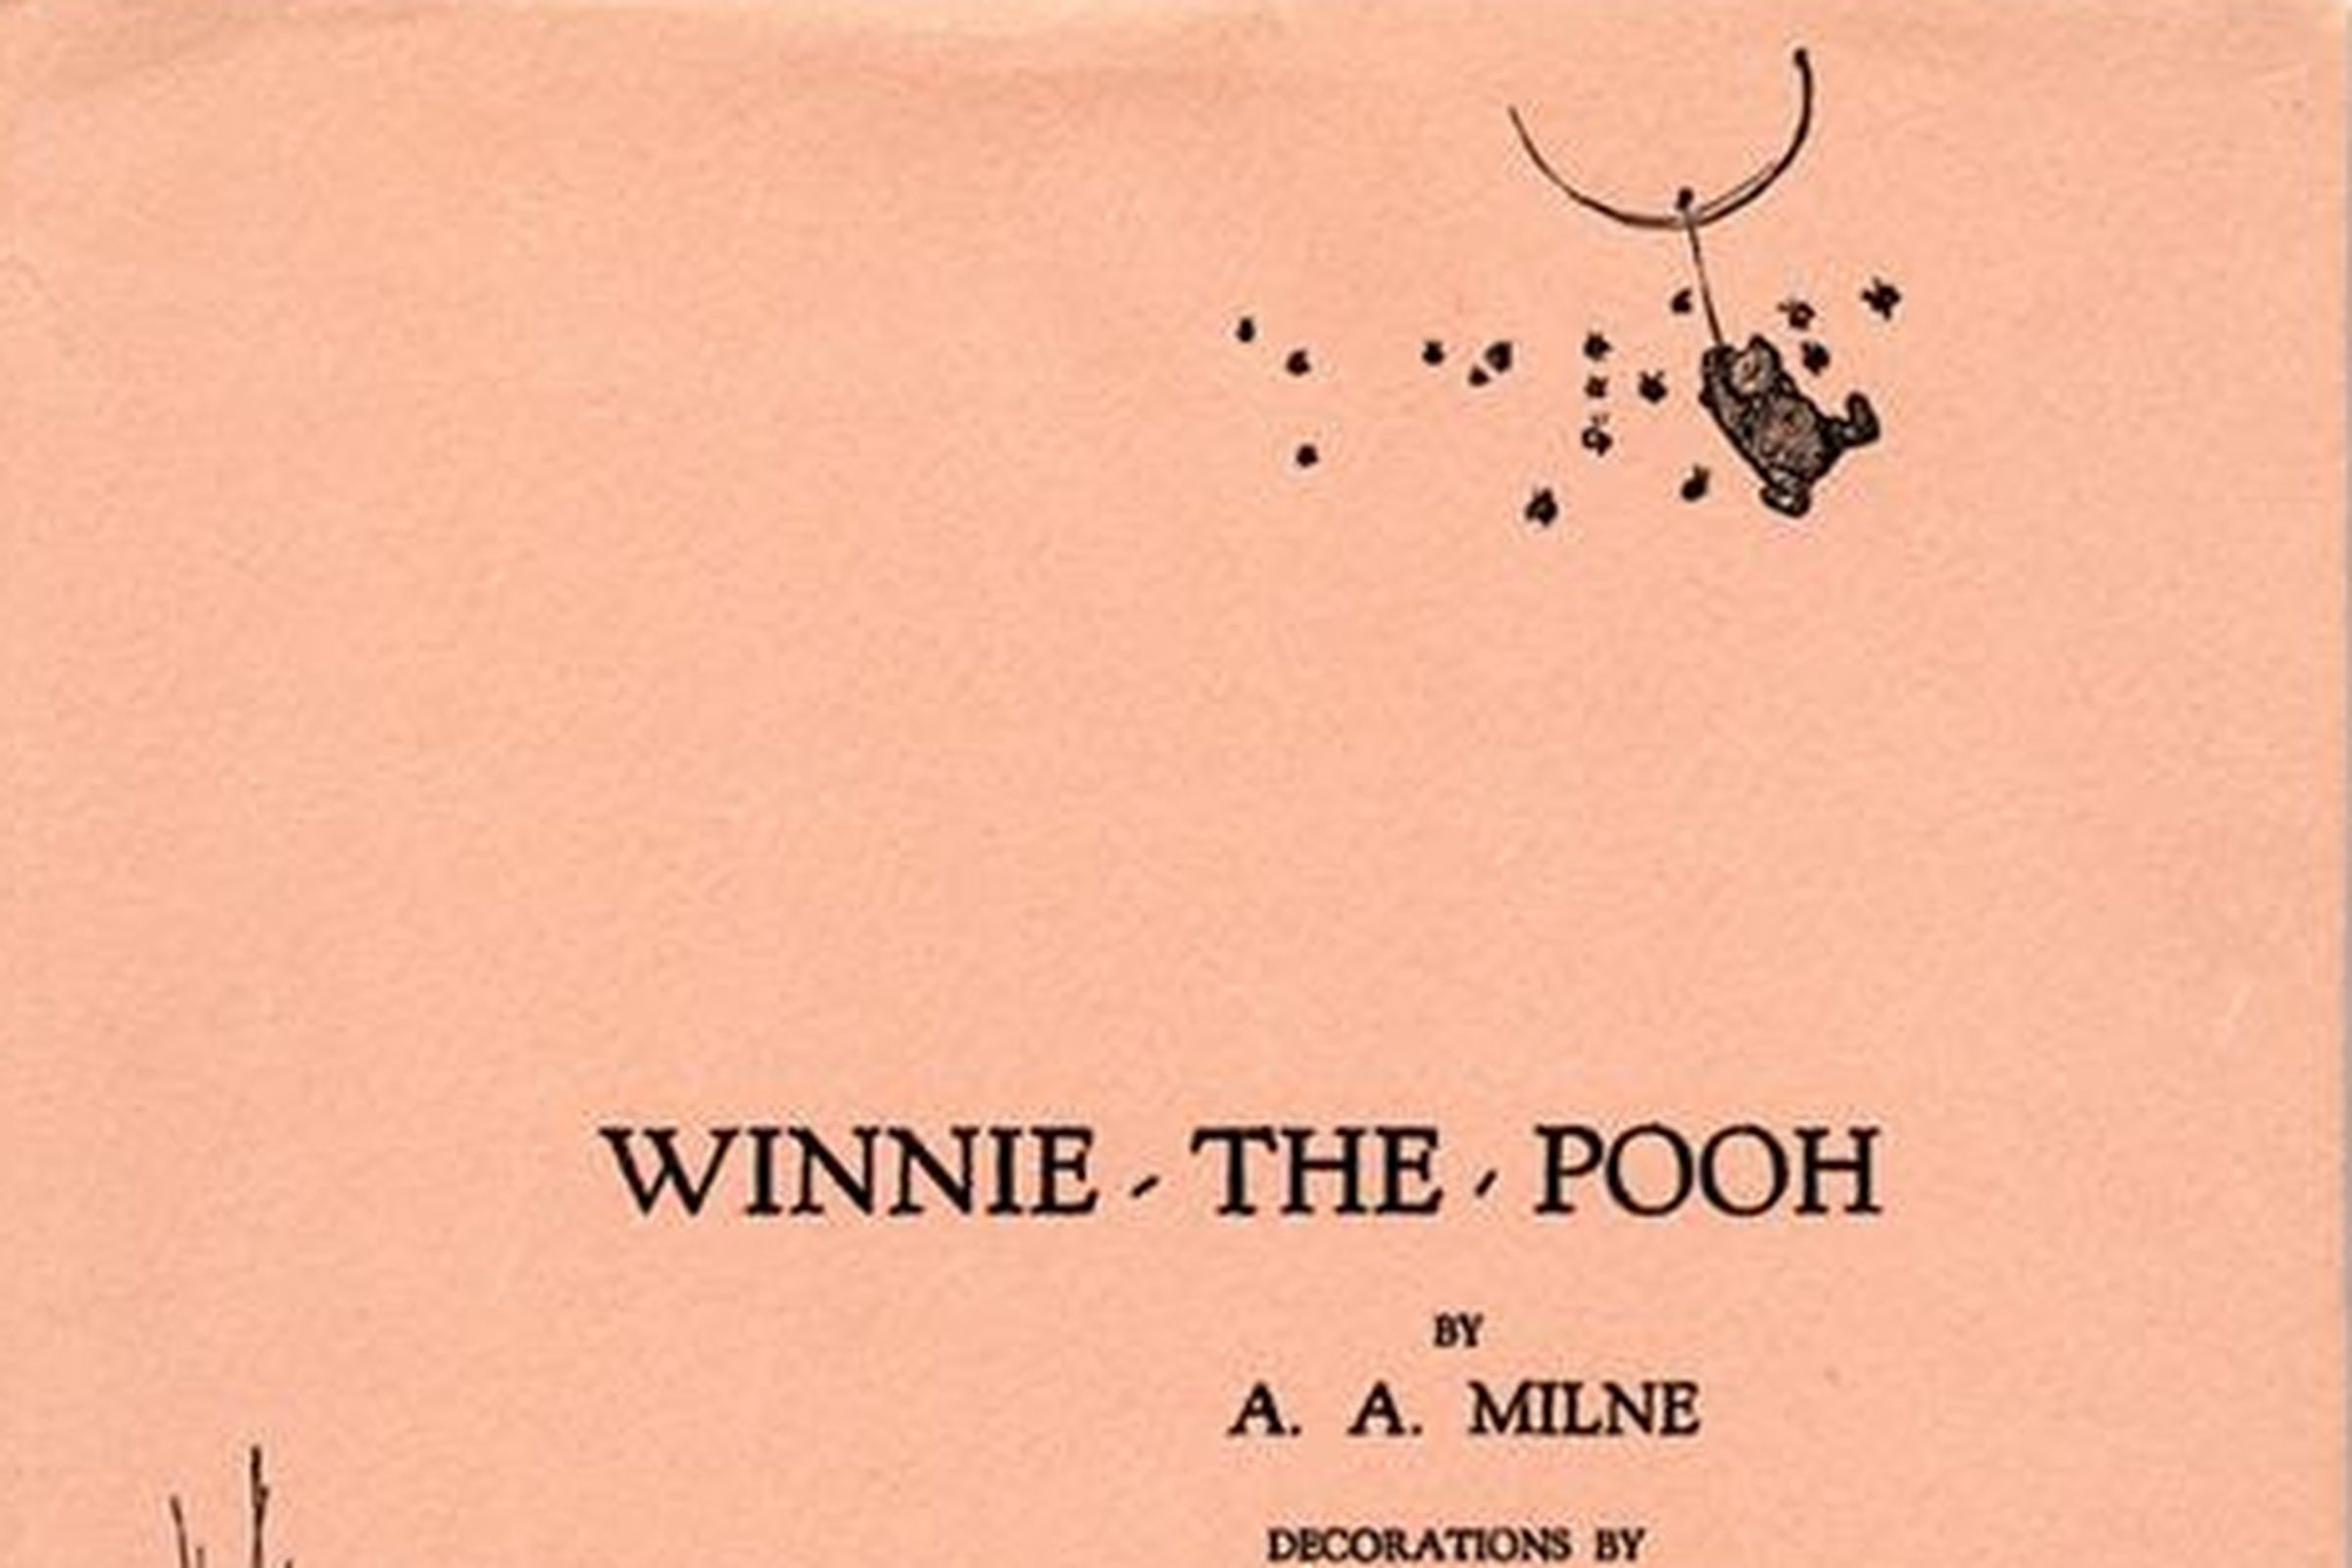 Cover art for A. A. Milne’s Winnie-the-Pooh.